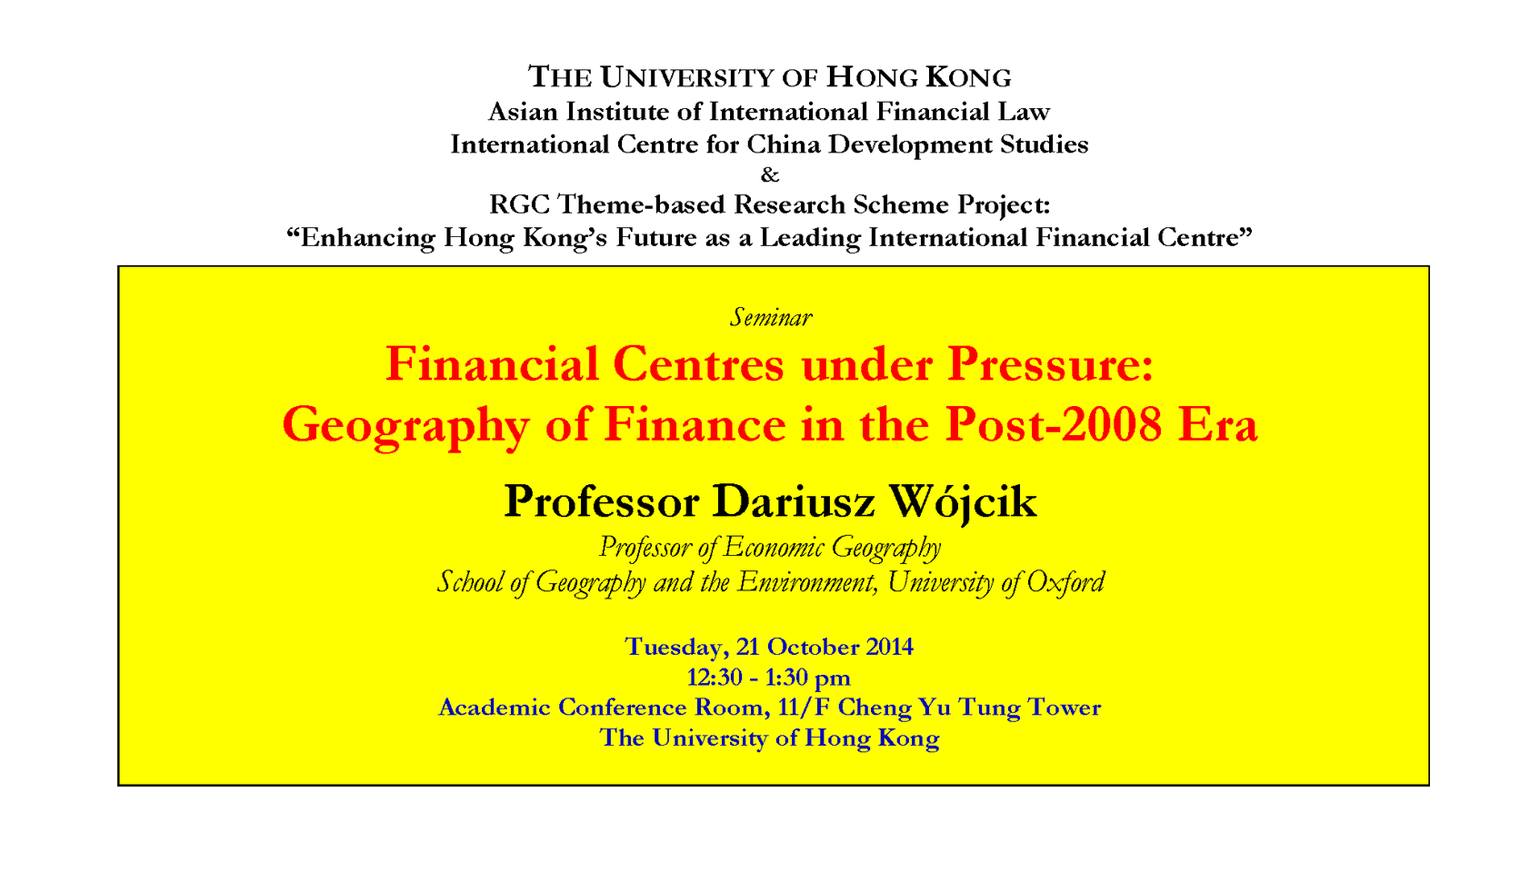 Financial Centres under Pressure: Geography of Finance in the Post-2008 Era